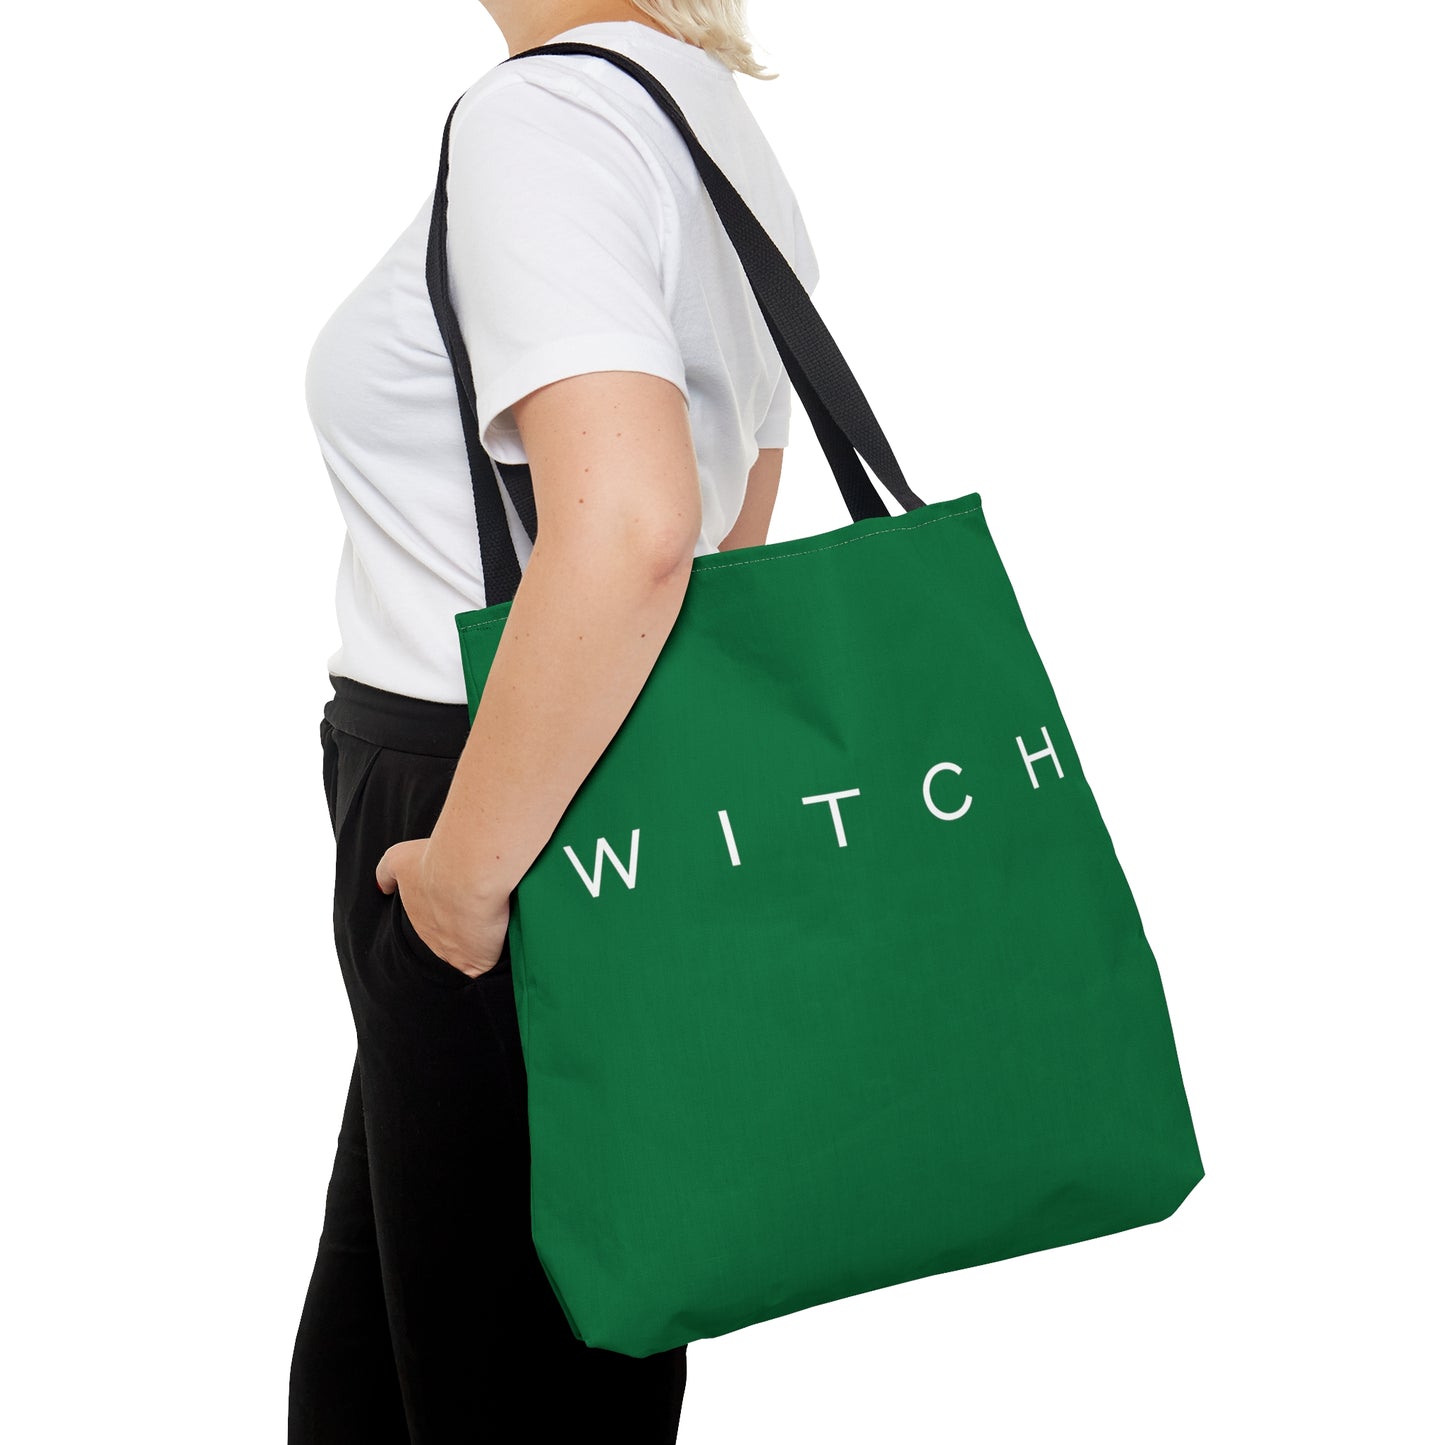 Green WITCH tote - Prosperity